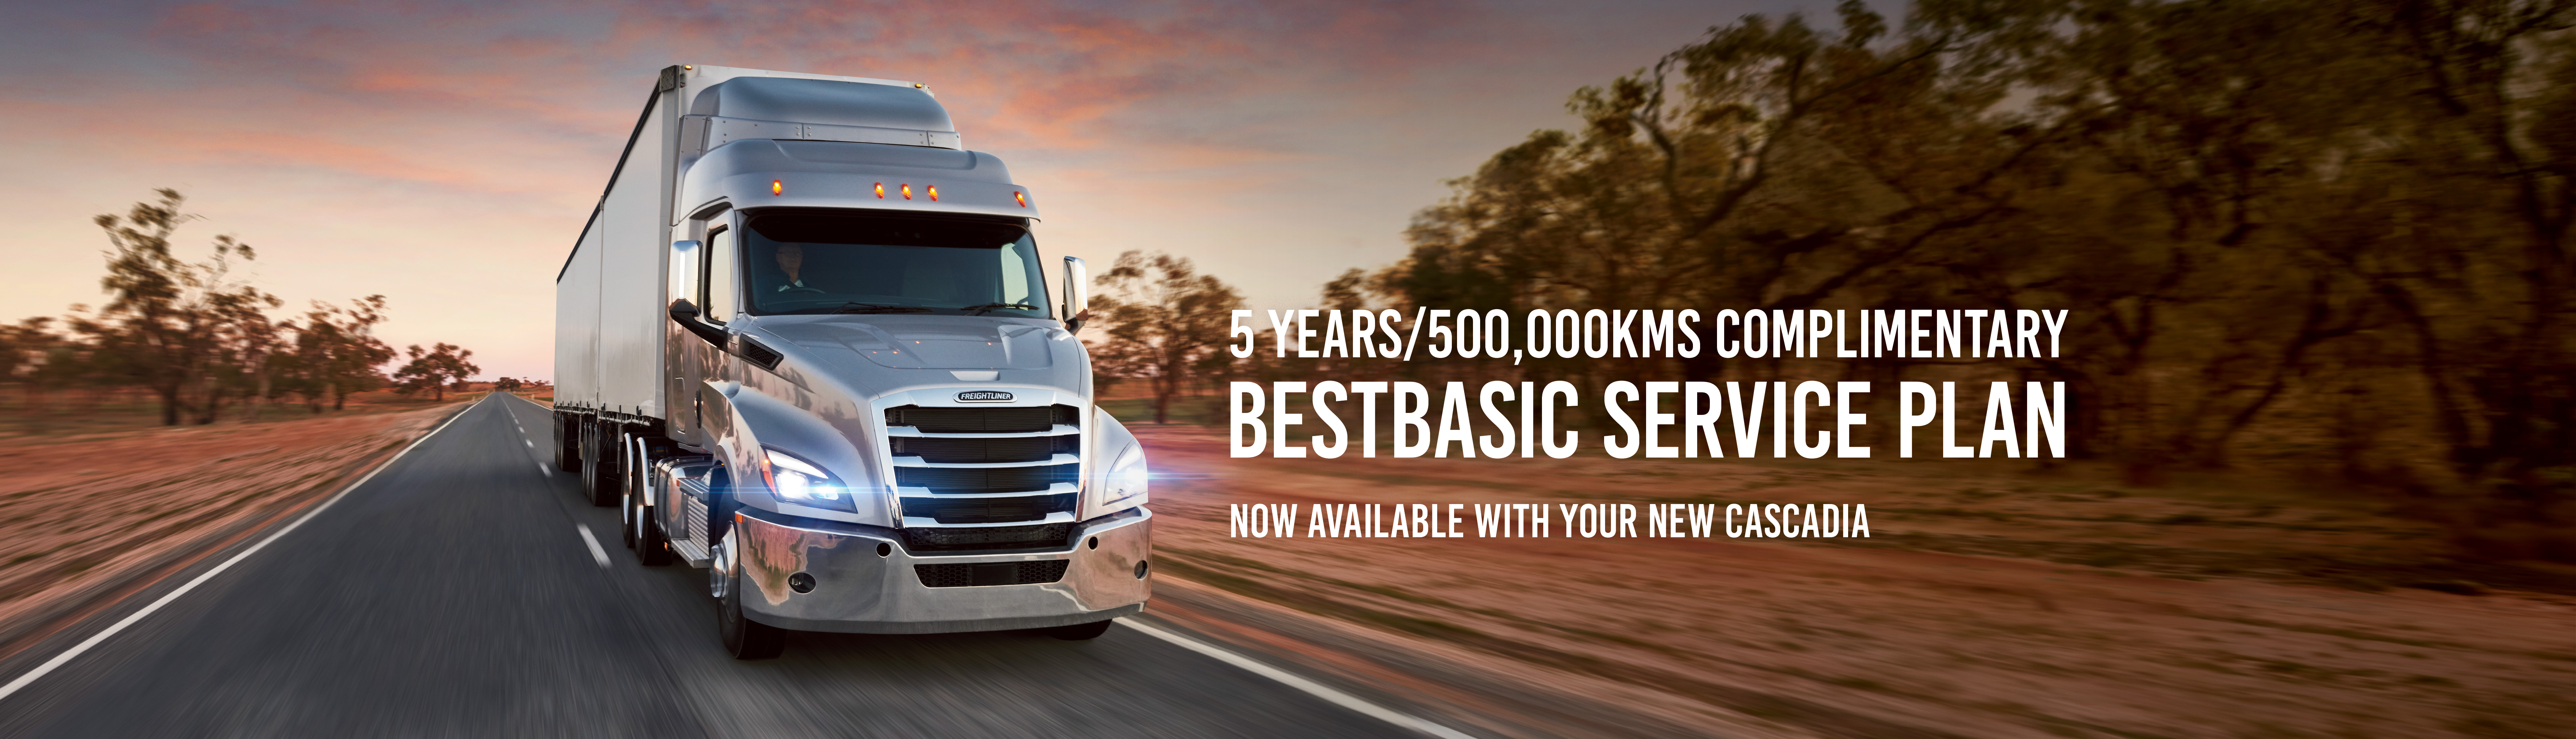 CASCADIA - COMPLIMENTARY BESTBASIC SERVICING OFFER